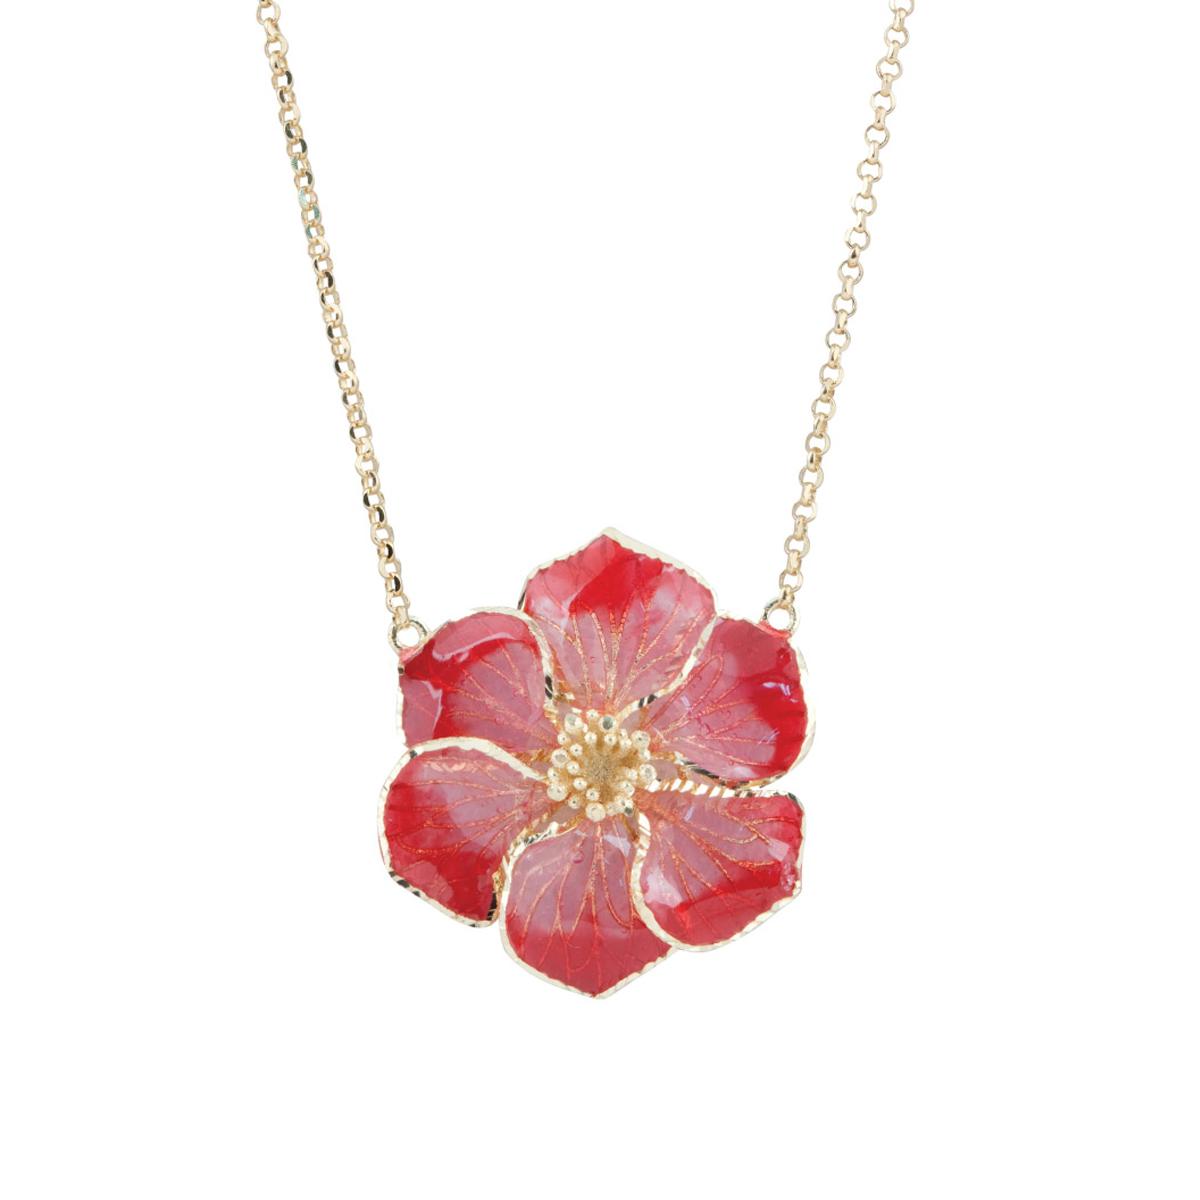 Maple necklace in 18kt yellow gold, cathedral enamel - CEA3100-MG